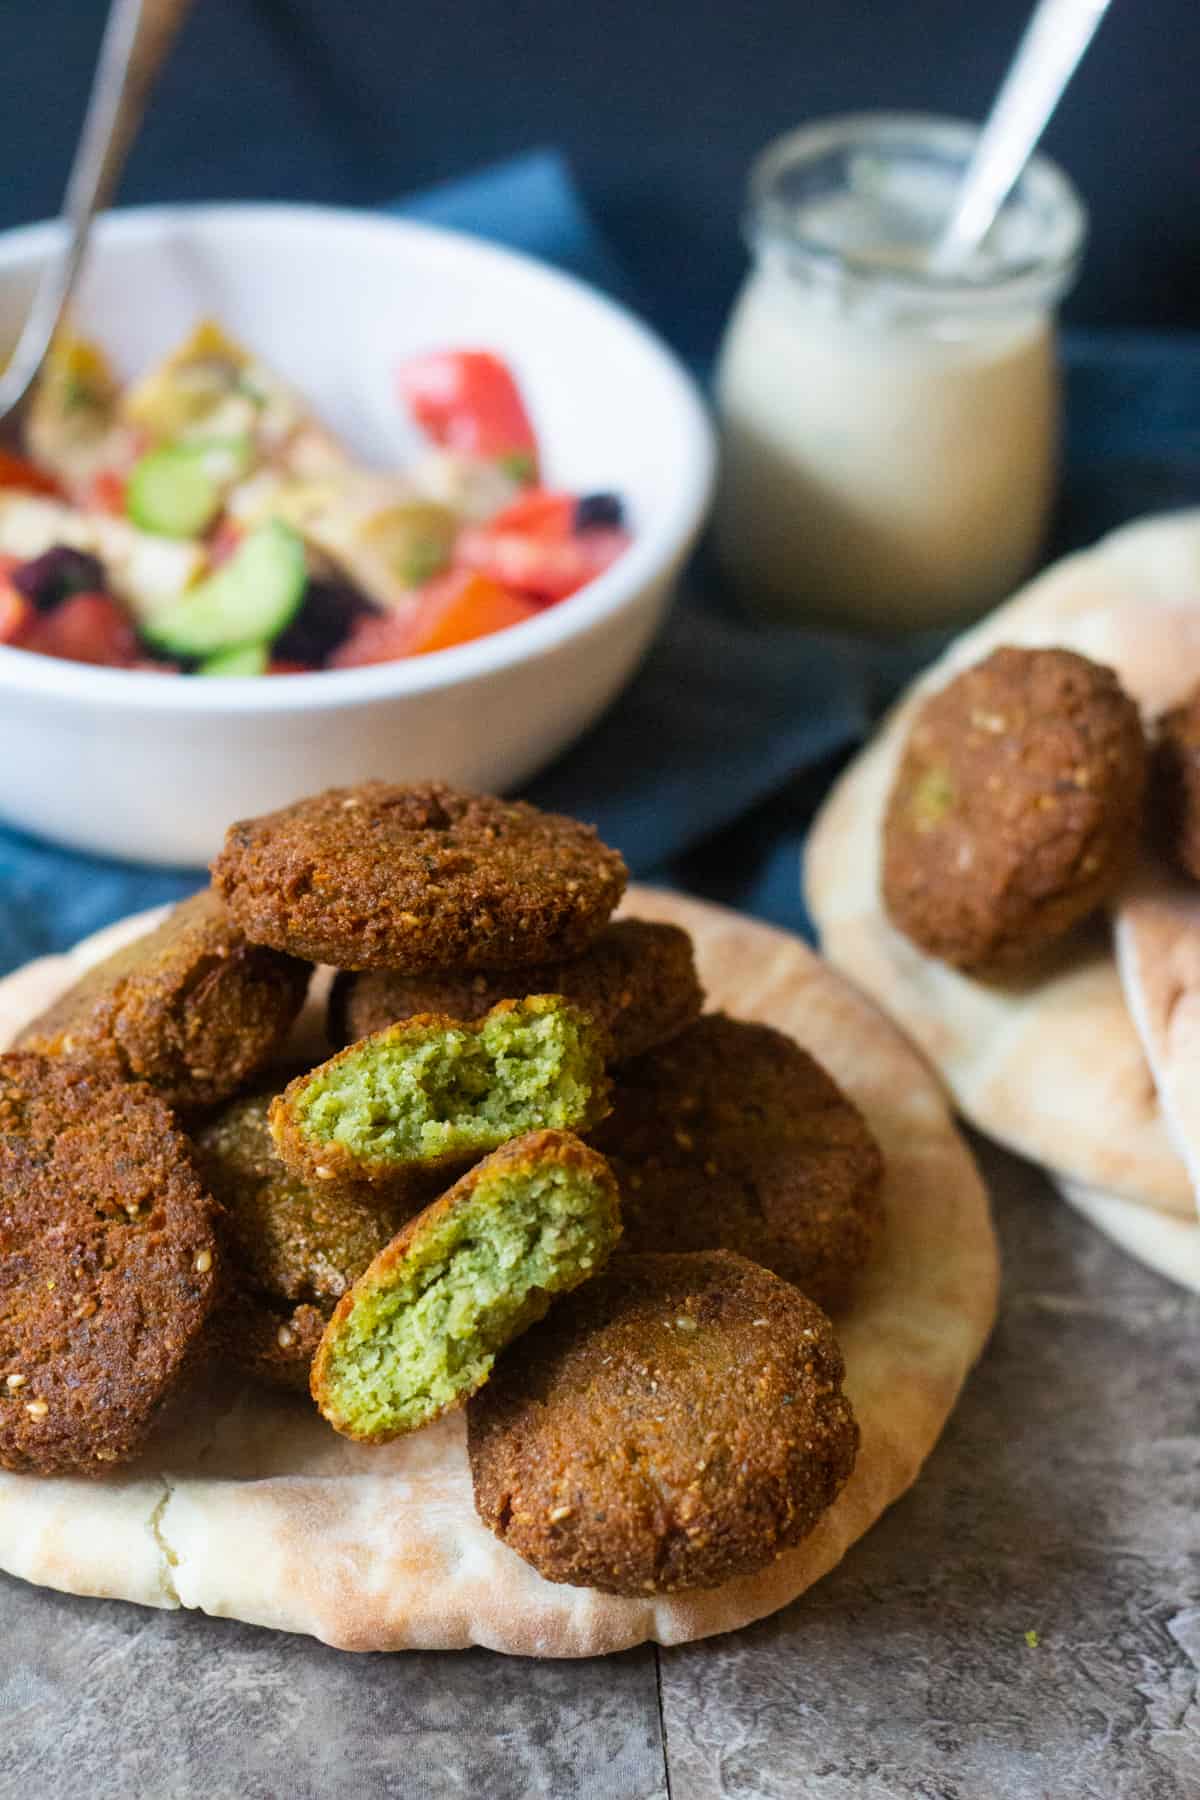 This homemade falafel recipe is easy to follow and makes delicious falafels that are crispy on the outside and soft and fluffy on the inside. Learn how to make this staple of Middle Eastern cuisine at home and ditch the take out.
